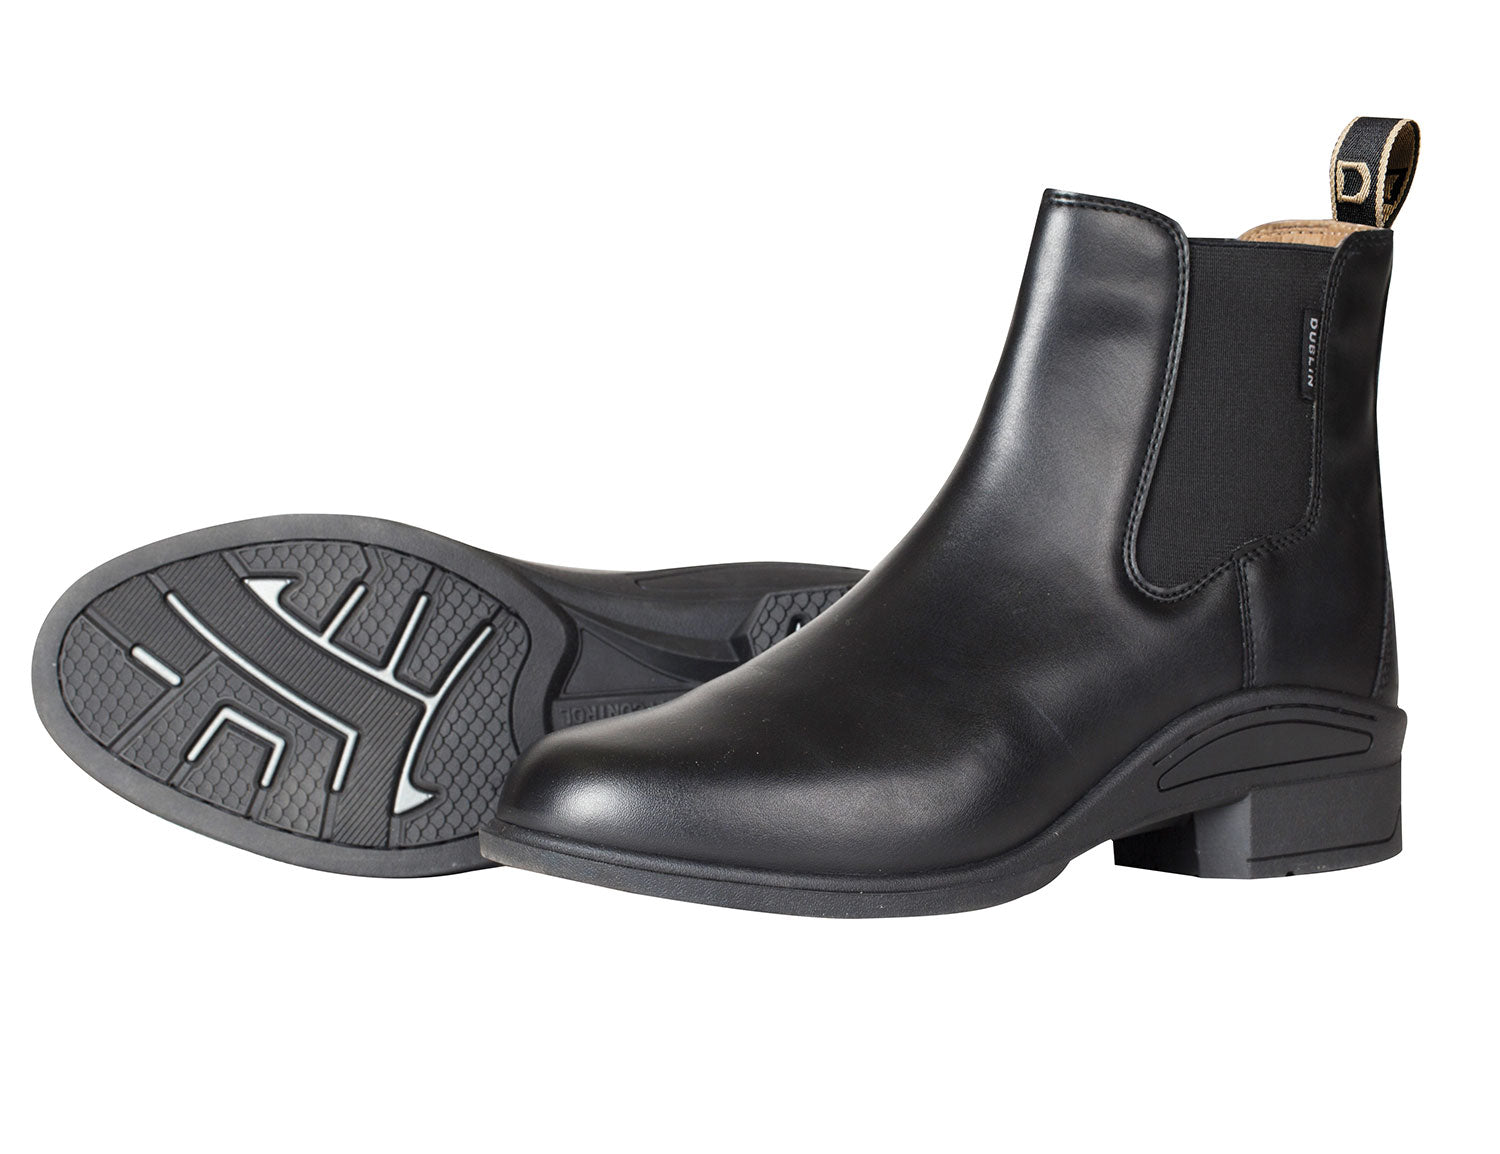 Altitude Jodhpur Ankle Boots Boot by Dublin 